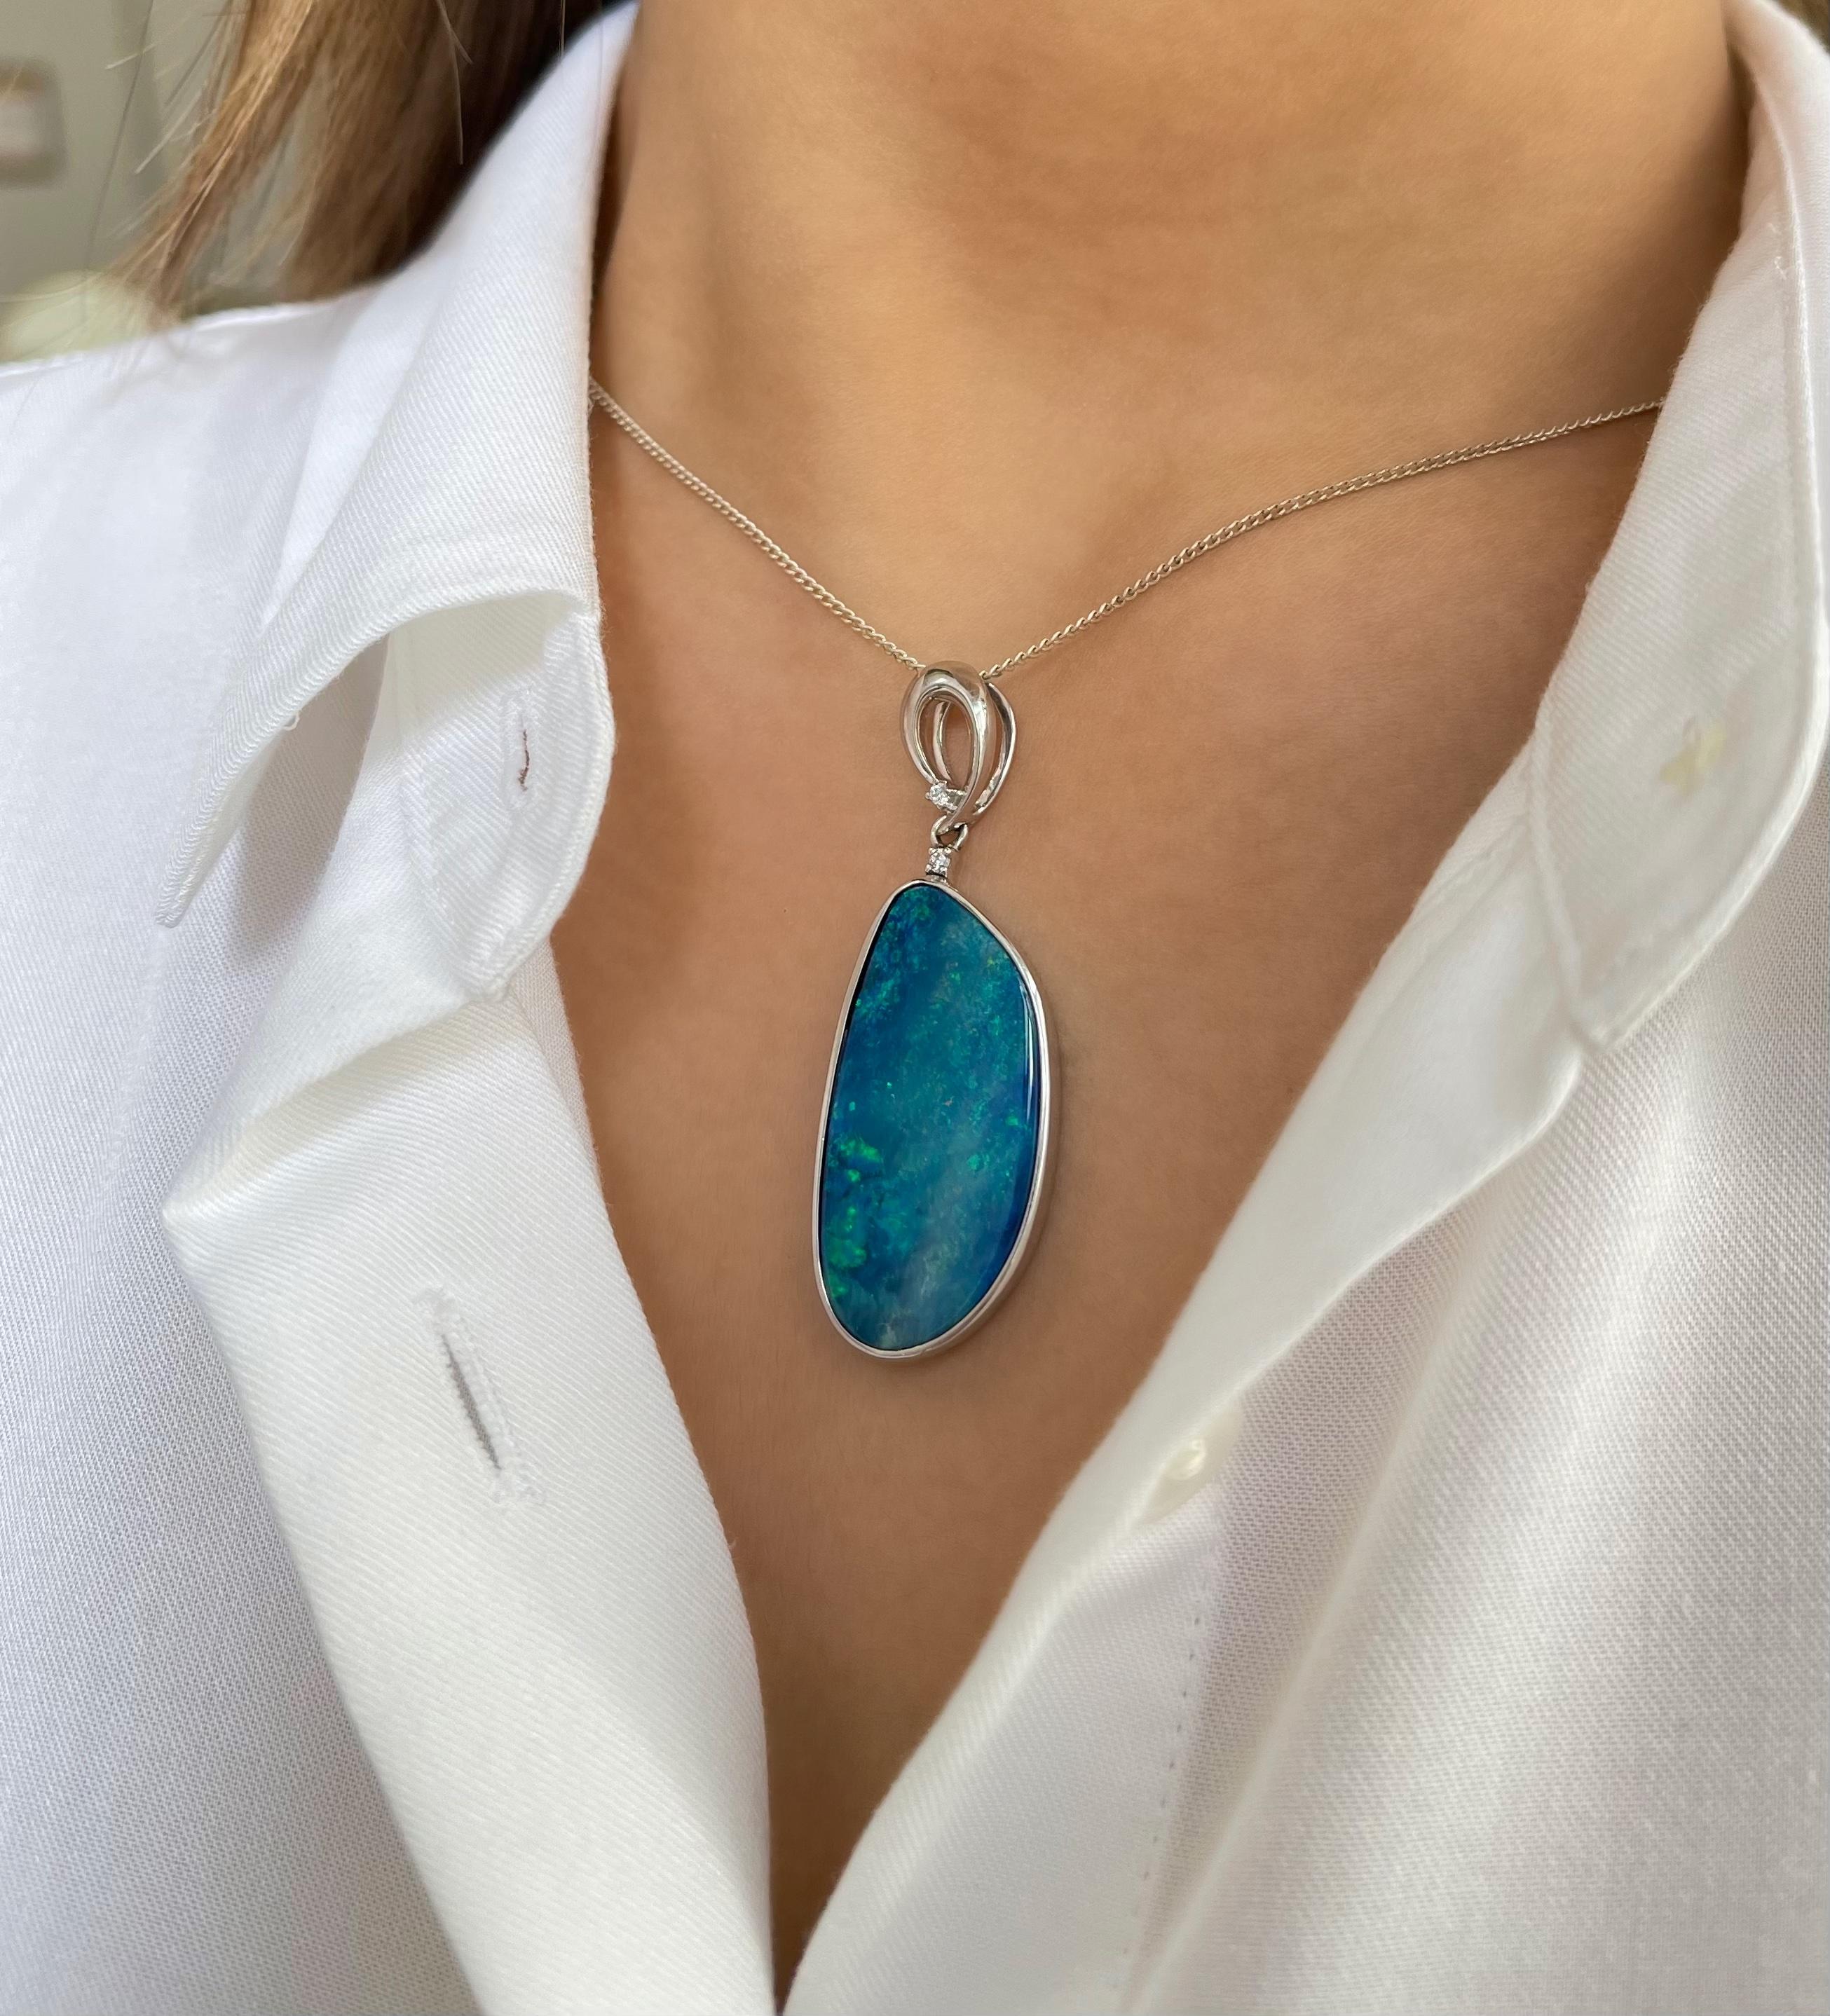 Contemporary Australian Premium Quality Opal Pendant Set in Sterling Silver